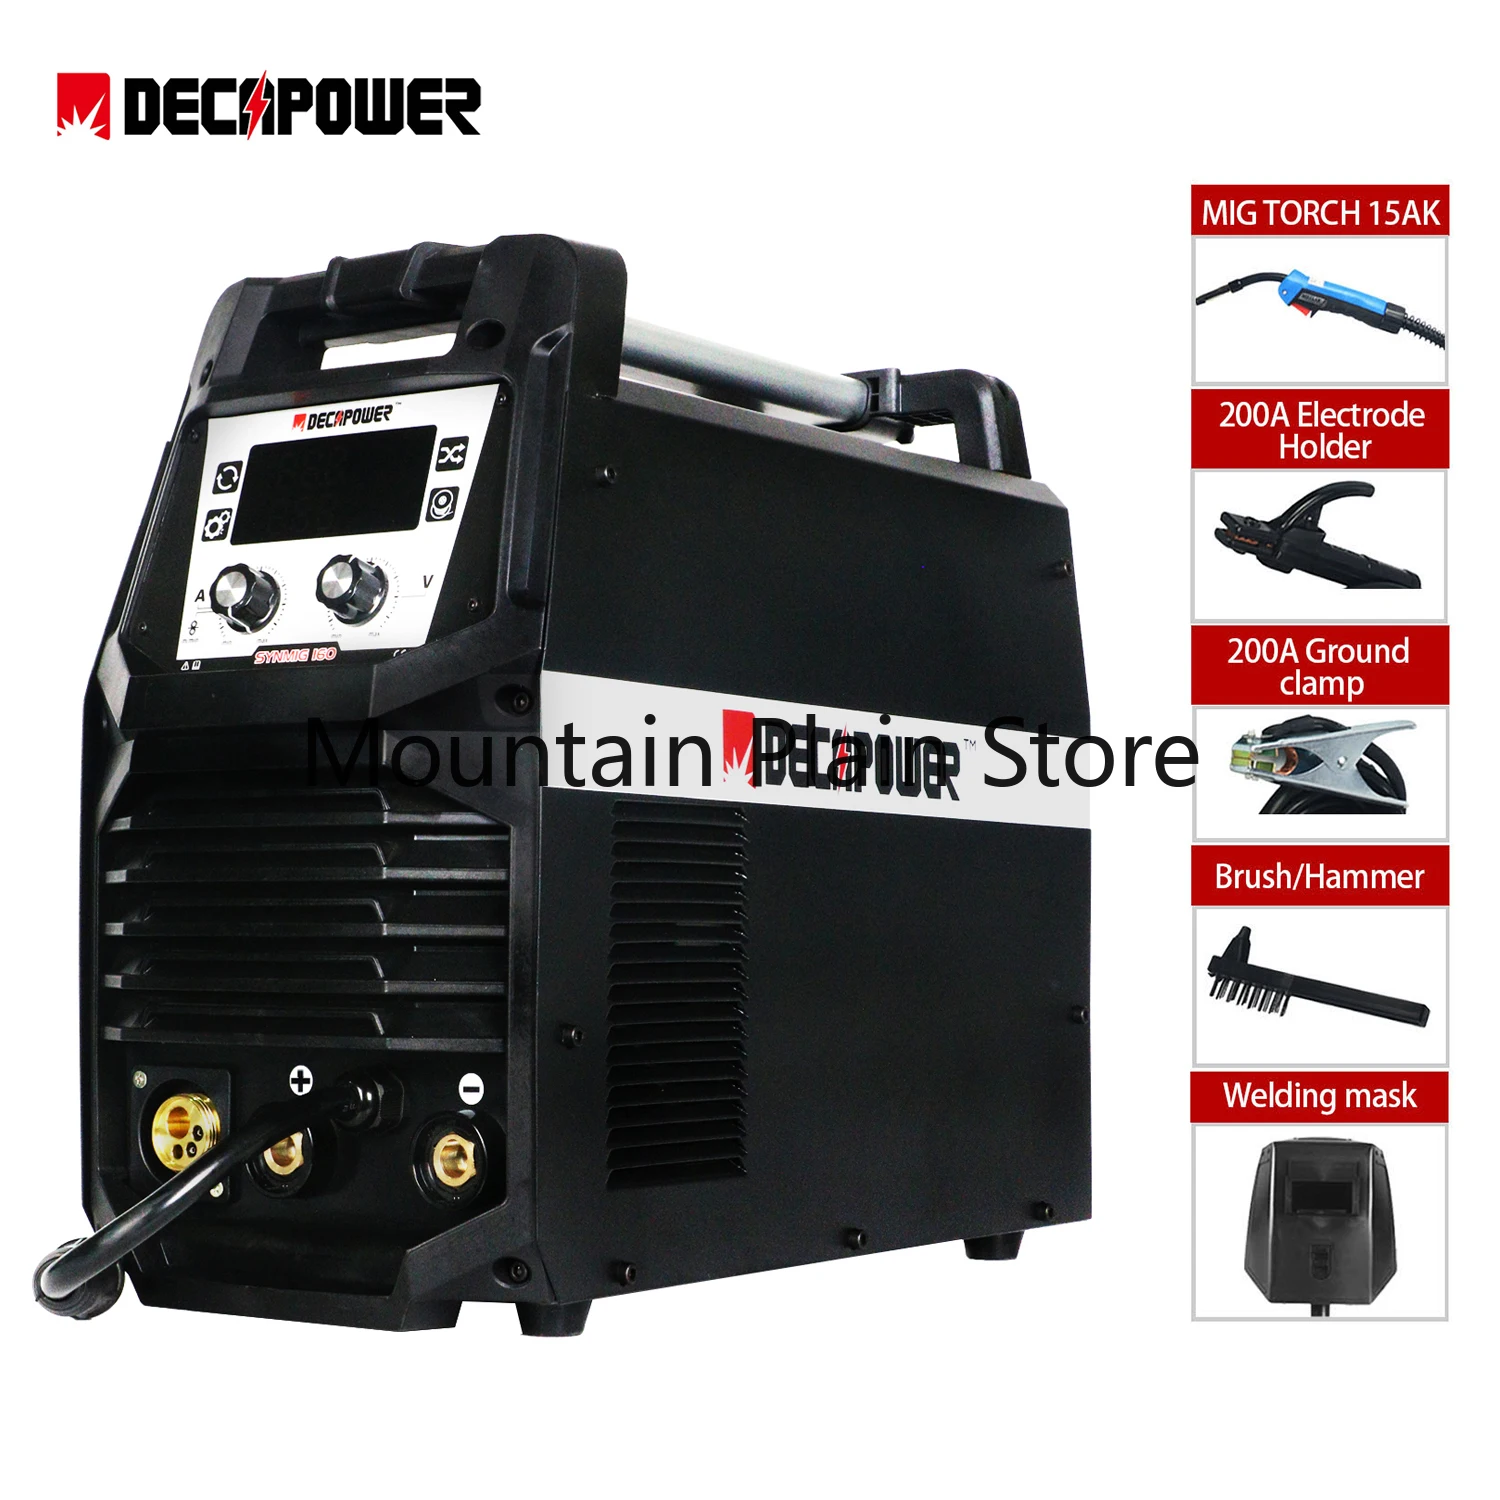 

DECAPOWER 200A 4 in 1 ARC MMA TIG MAG MIG Welder for Gas Gasless Welding Machine with Indutance Adjustment